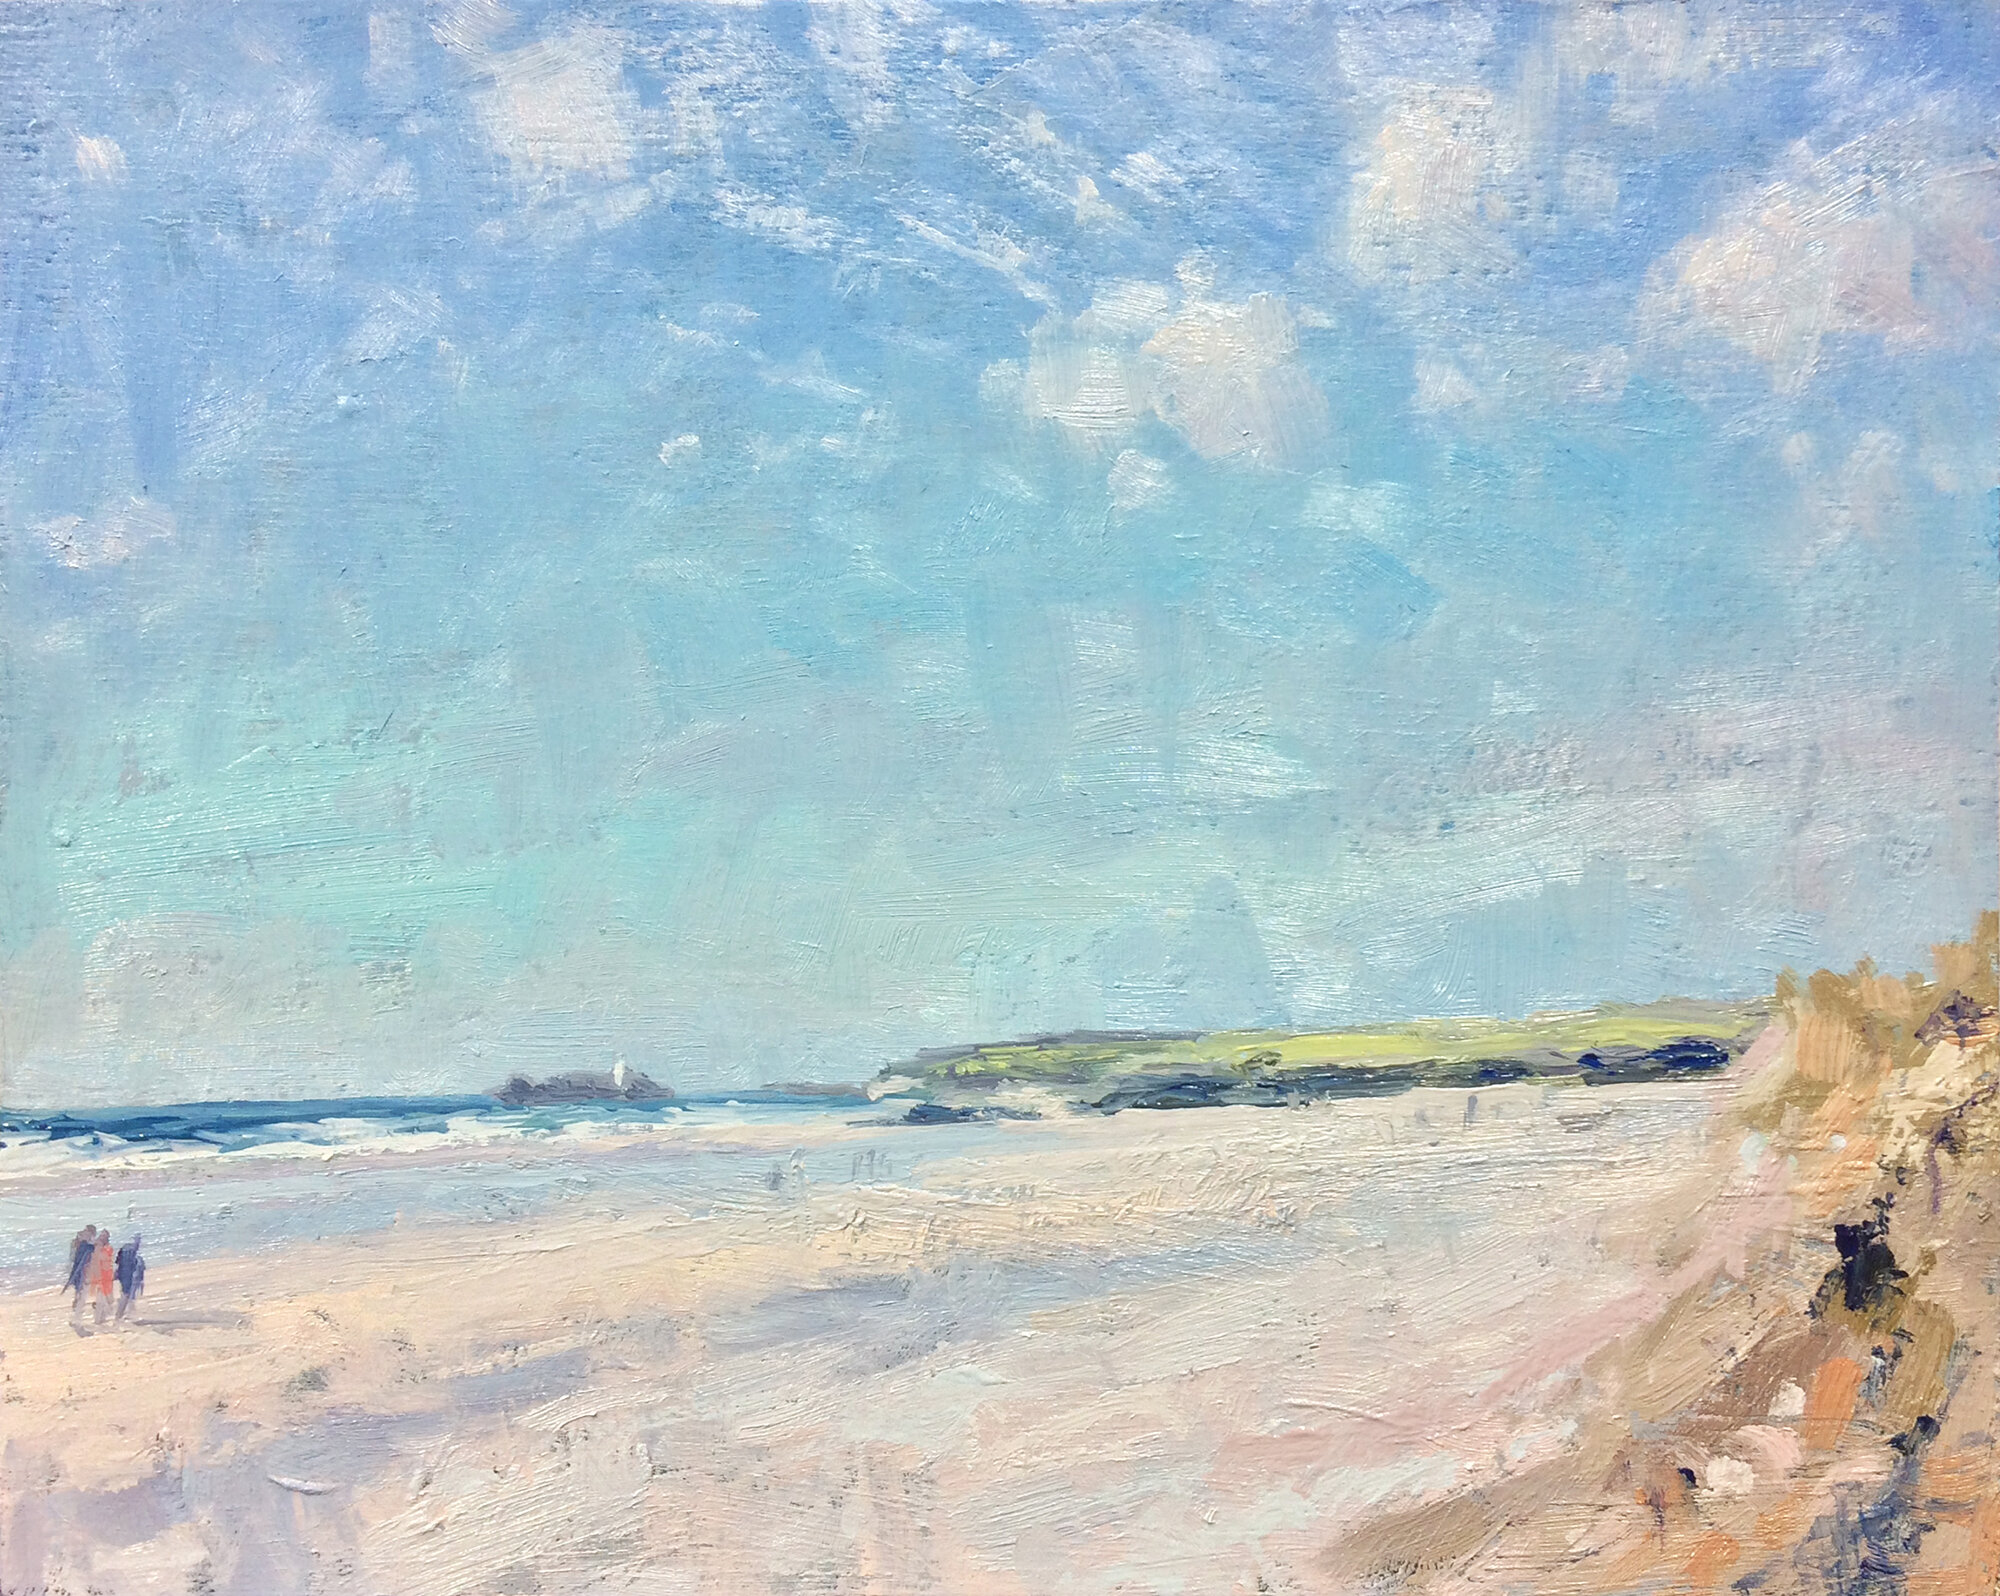 Andrew Barrowman - 'Walking Along the Beach at Gwithian'